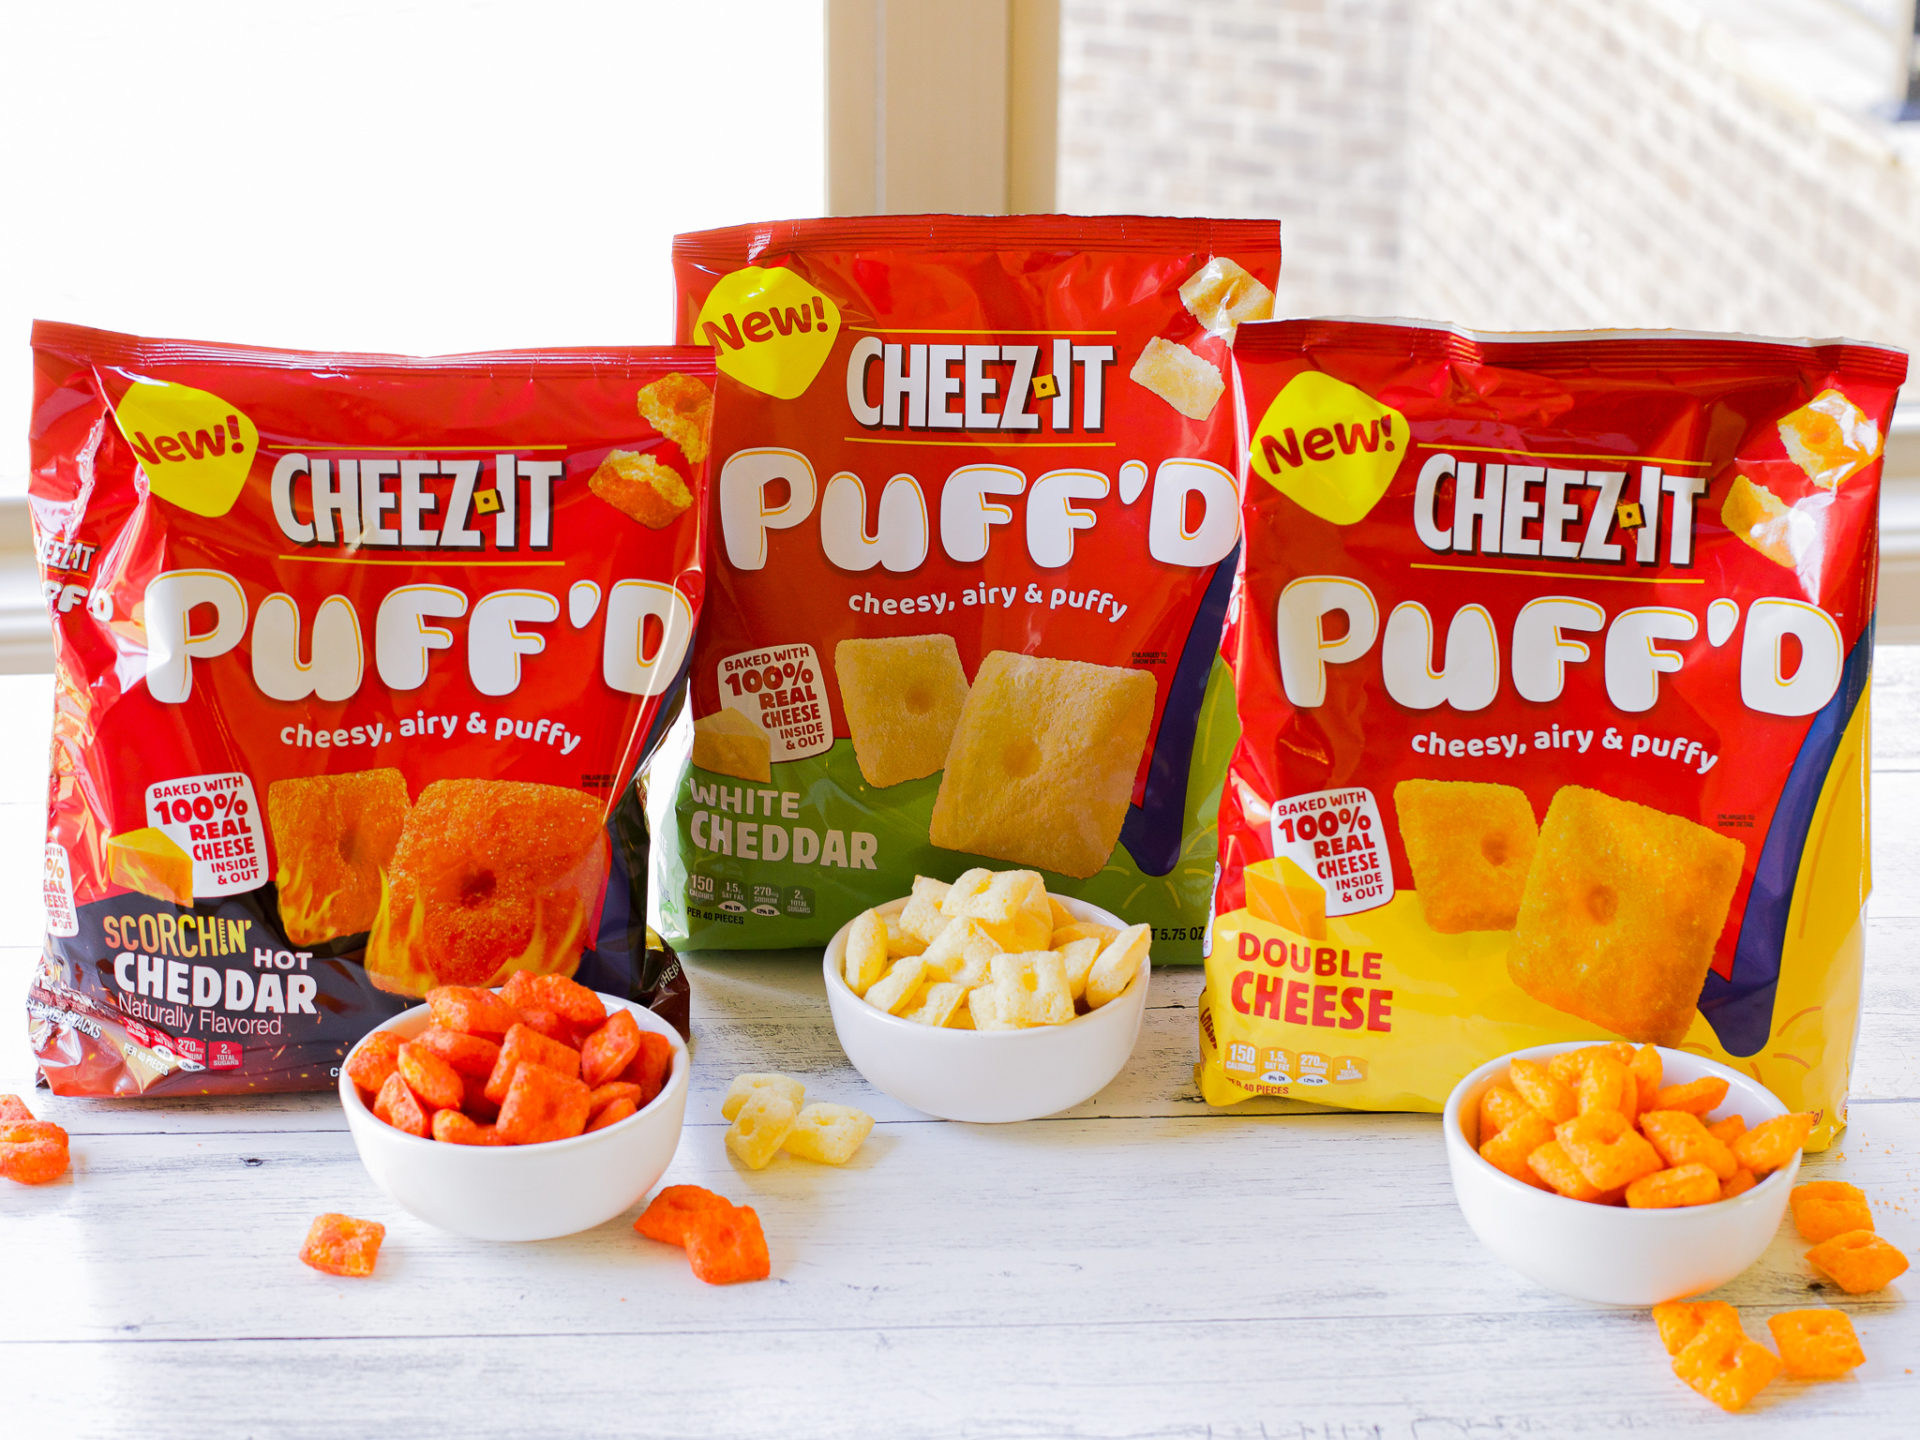 Cheez-It Snap’d Or Puff’d Crackers As Low As $2.99 At Kroger